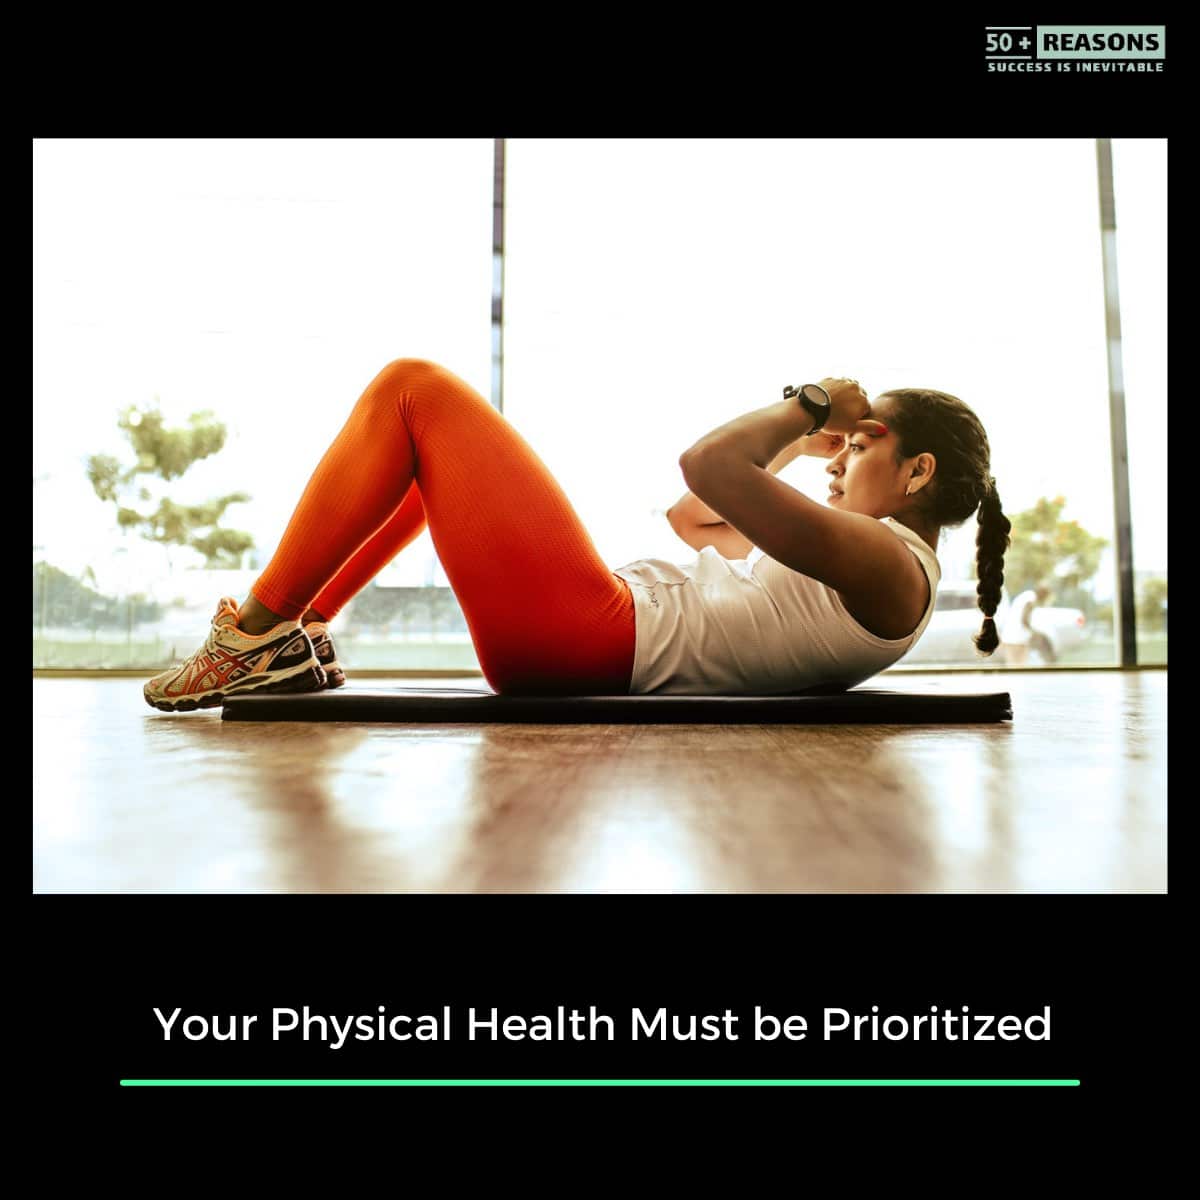 Your Physical Health Must be Prioritized